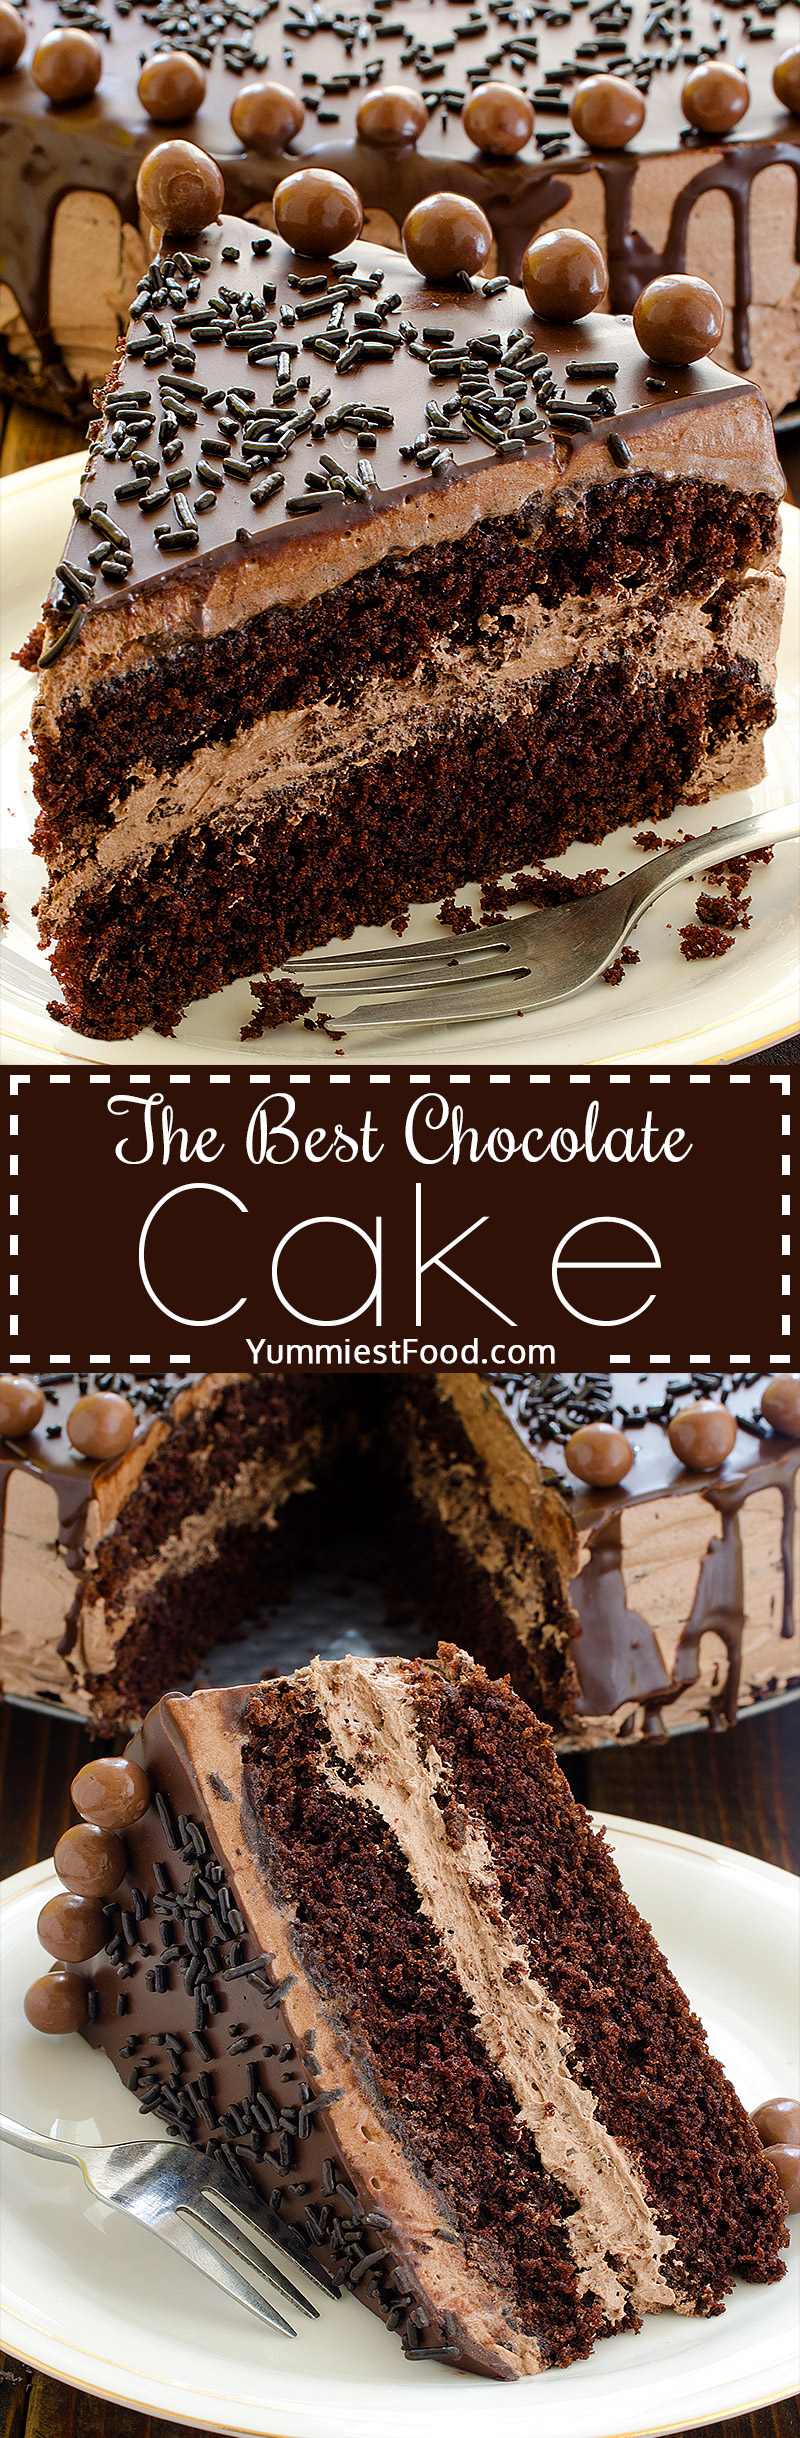 The BEST Chocolate Cake - great combination of chocolate and coffee